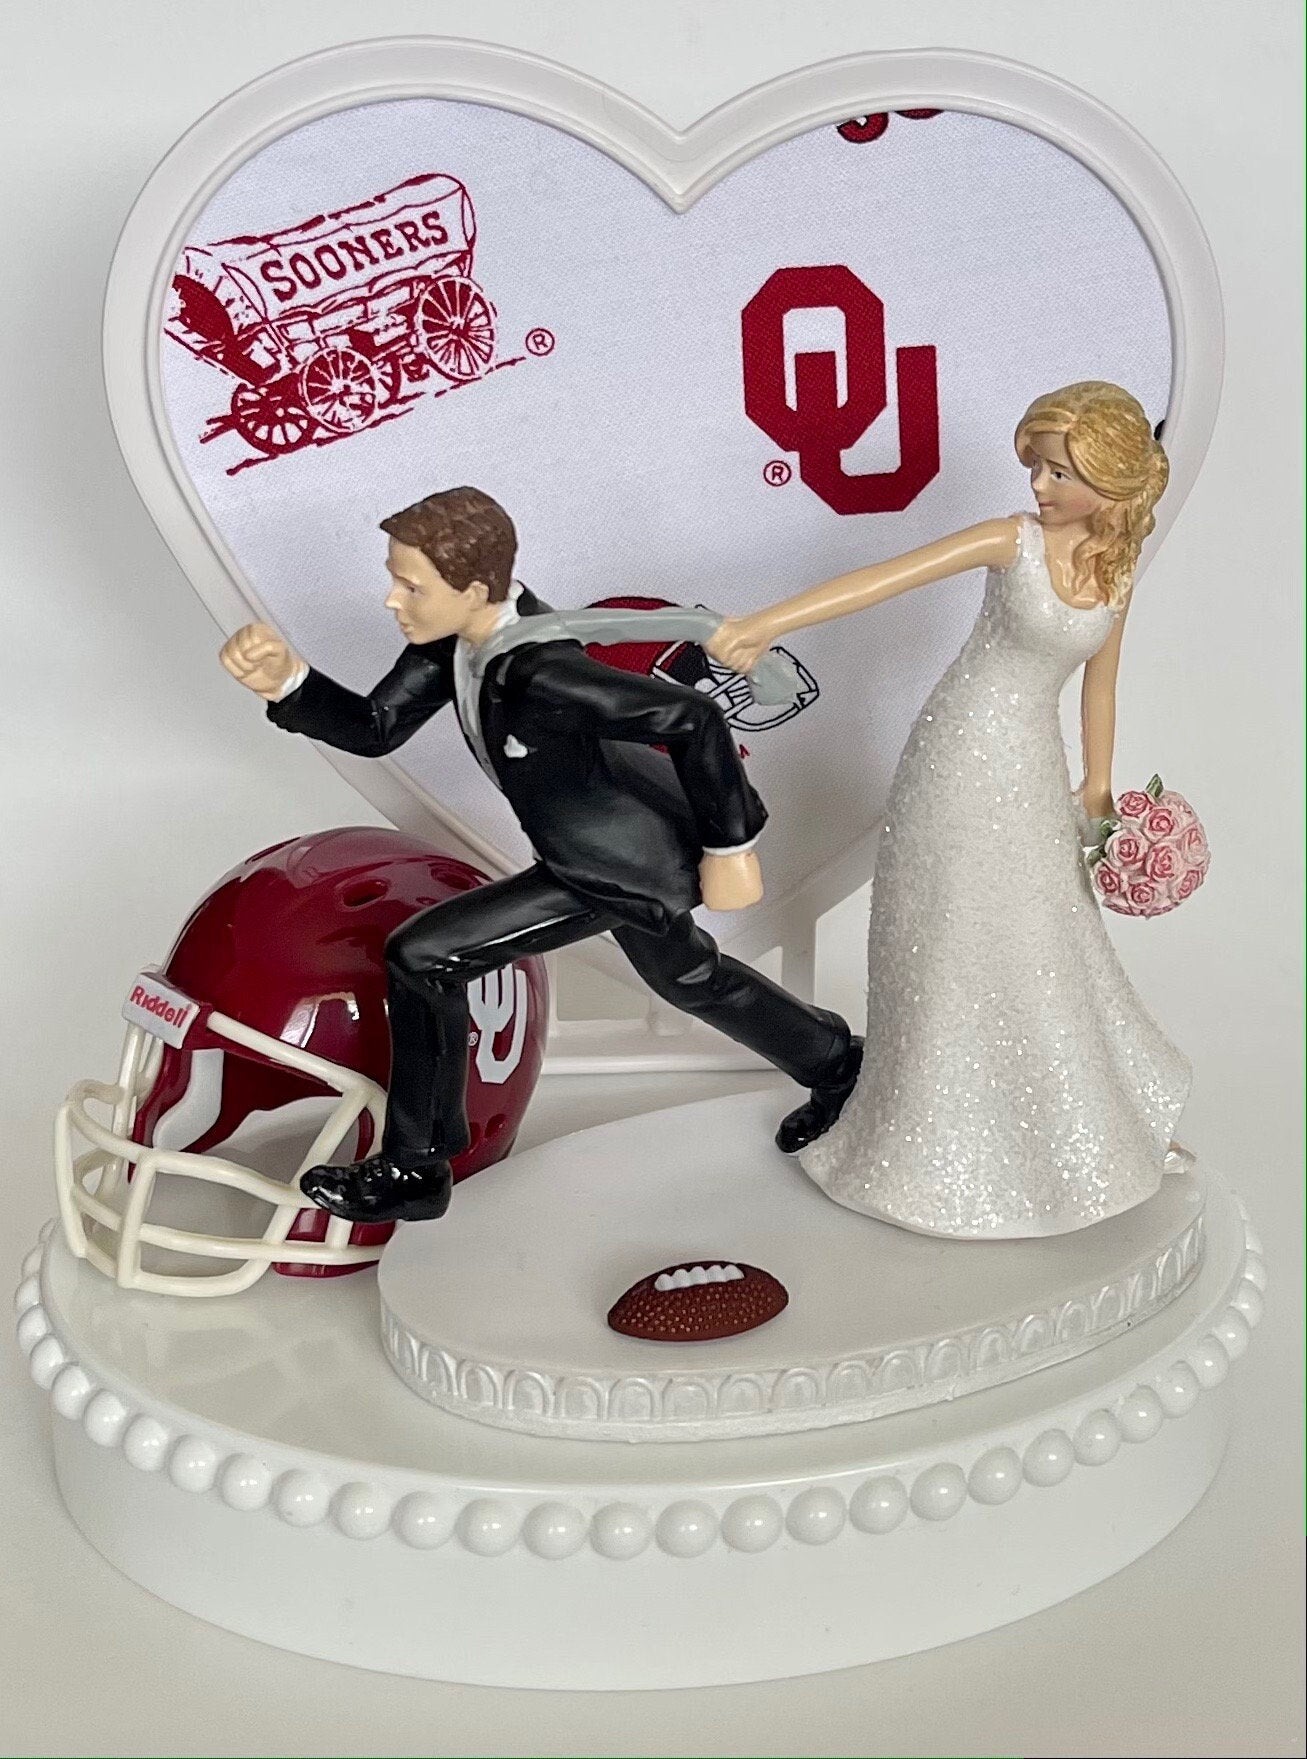 Wedding Cake Topper University of Oklahoma Sooners Football Themed Running Humorous Bride and Groom Funny OU Sports Fans Bridal Shower Gift